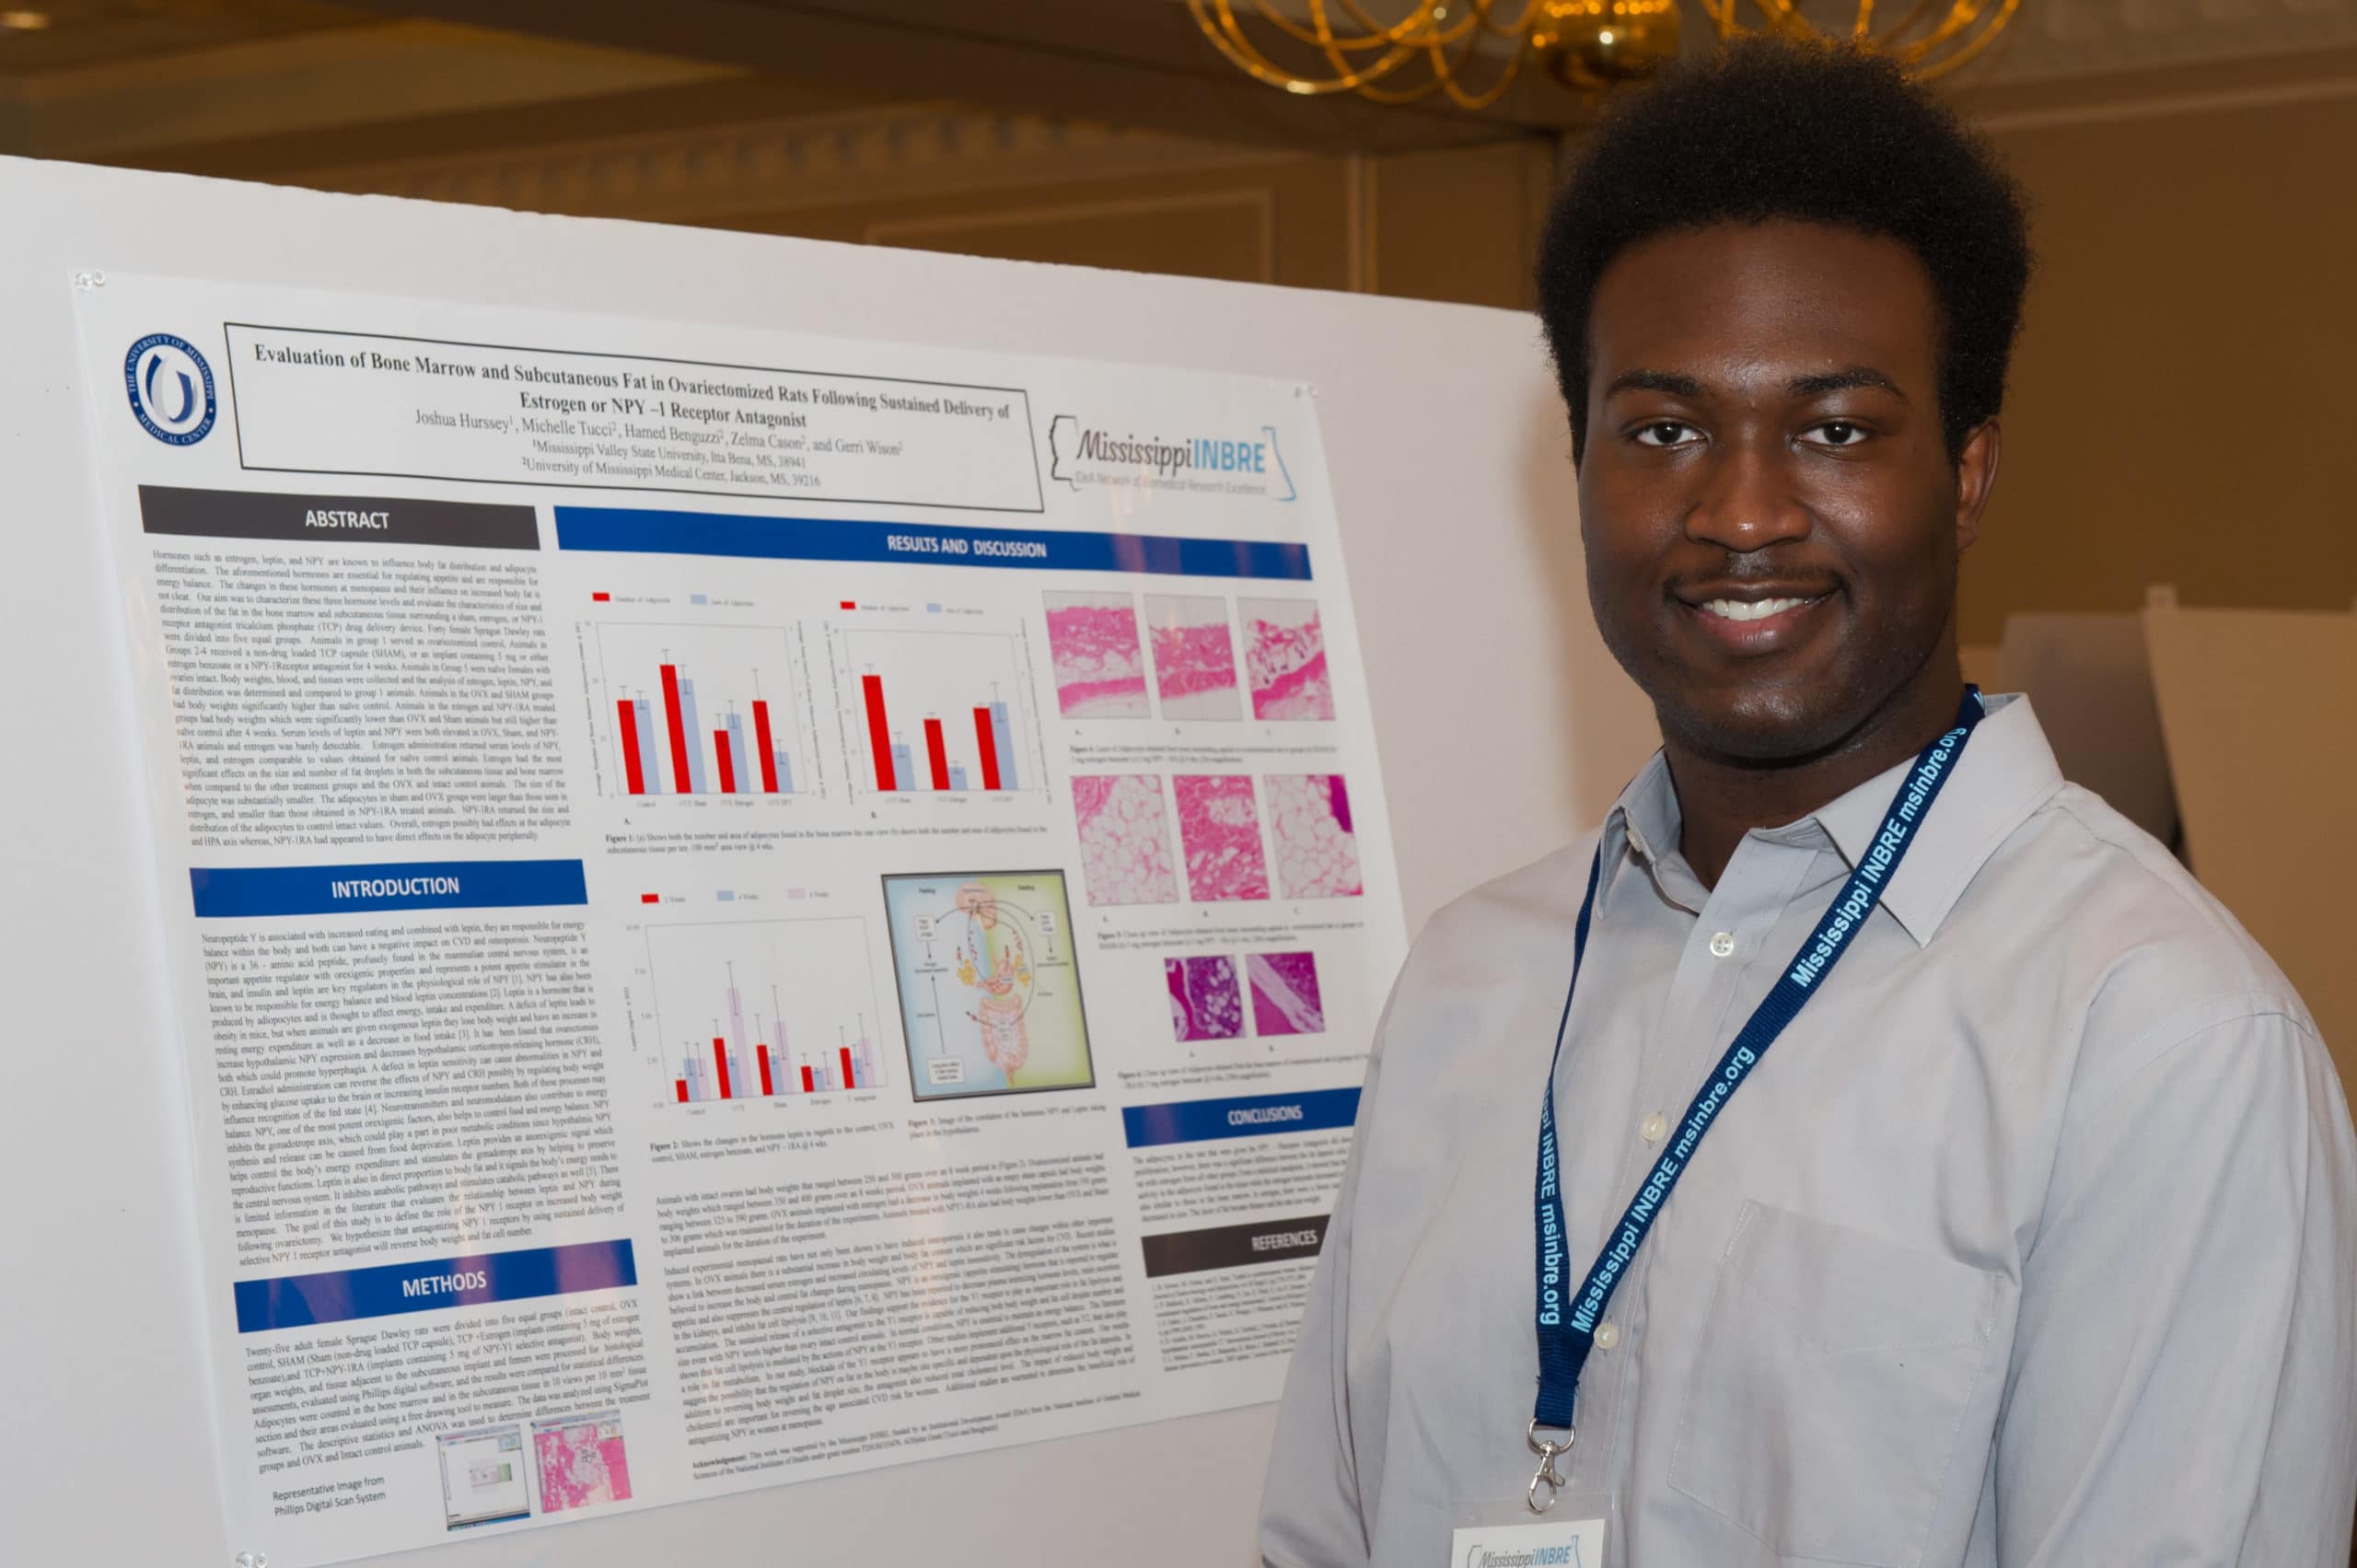 Mississippi INBRE Research Scholar, Joshua Hurssey has an MD/PhD in his Sights